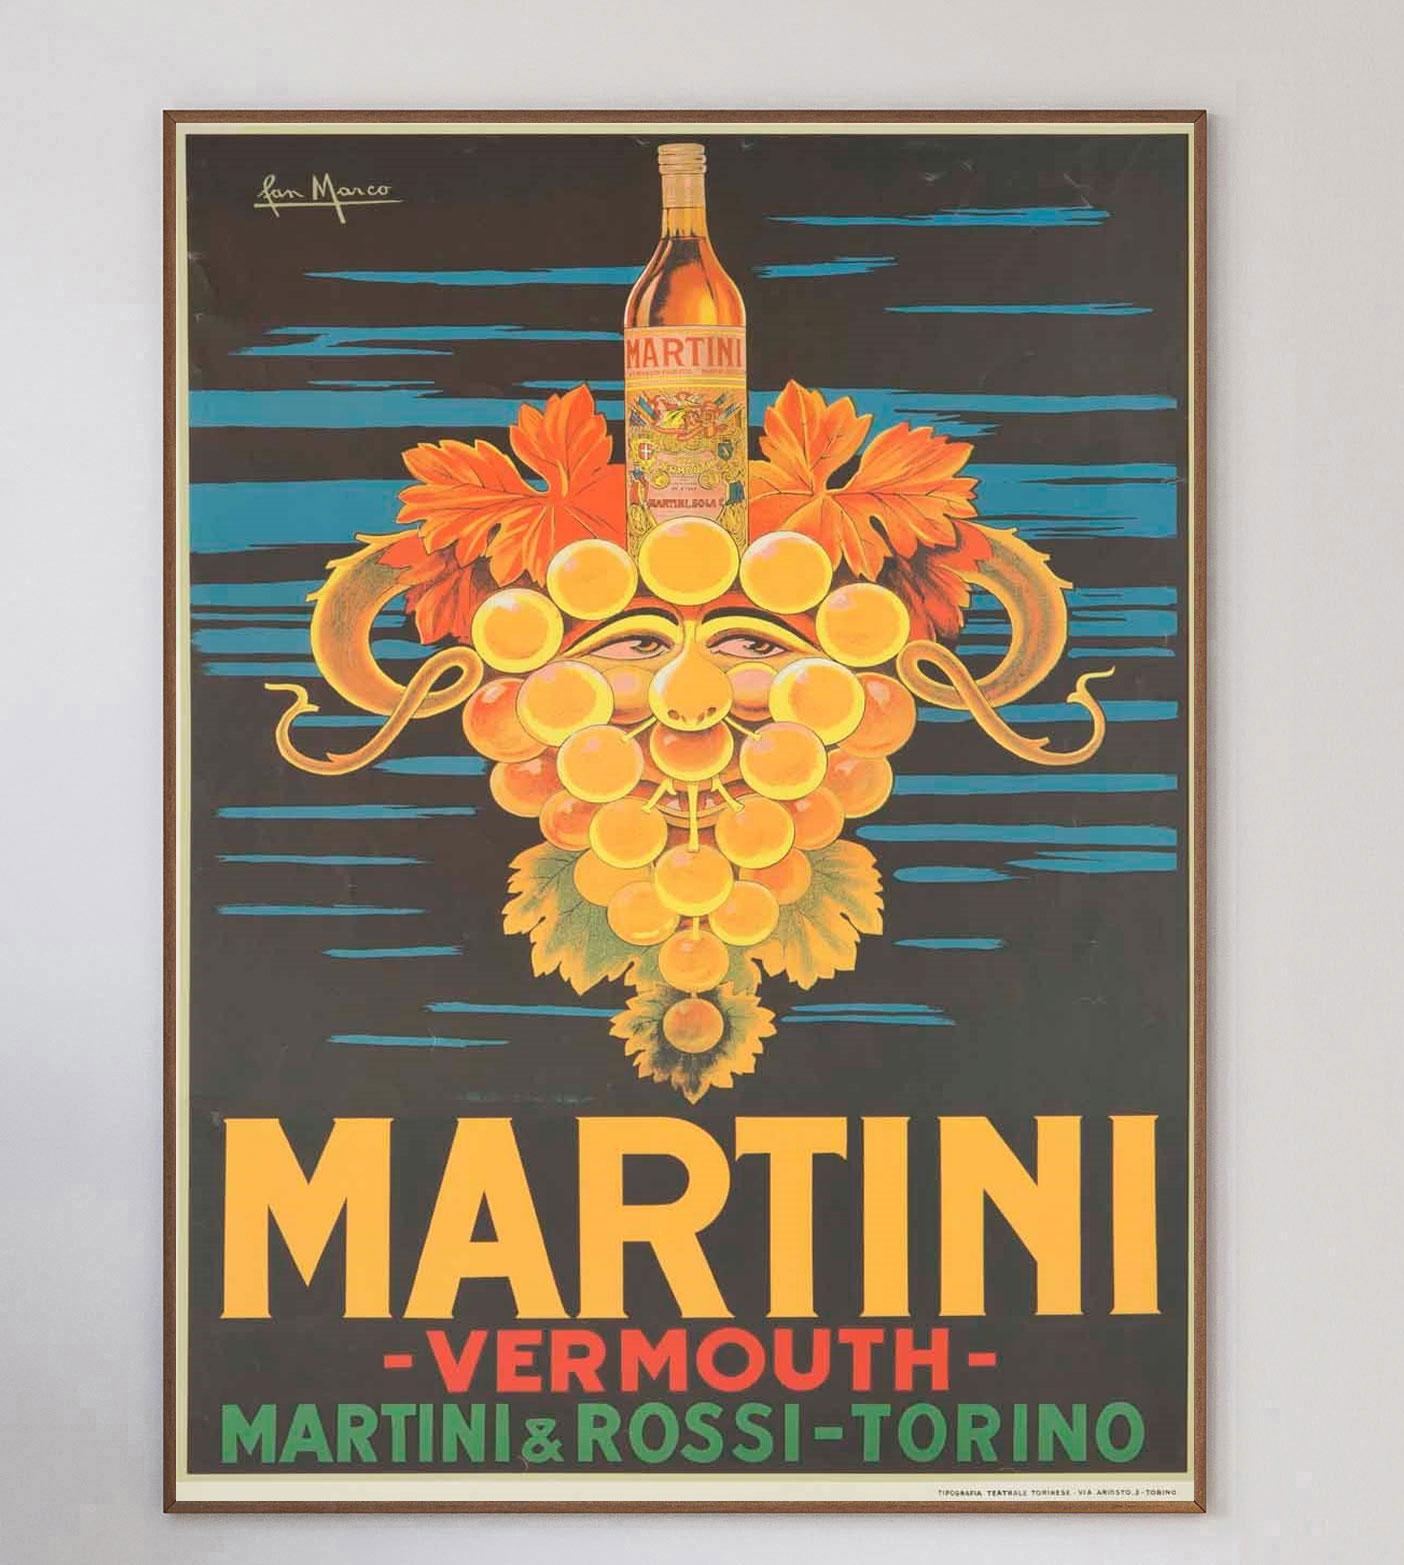 Beginning in the mid-19th century in Italy, Martini & Rosso has become a multi-national beverage brand. This beautiful poster was originally created in the 1930s, and was so successful that it was still running in the 1960s, and is widely seen